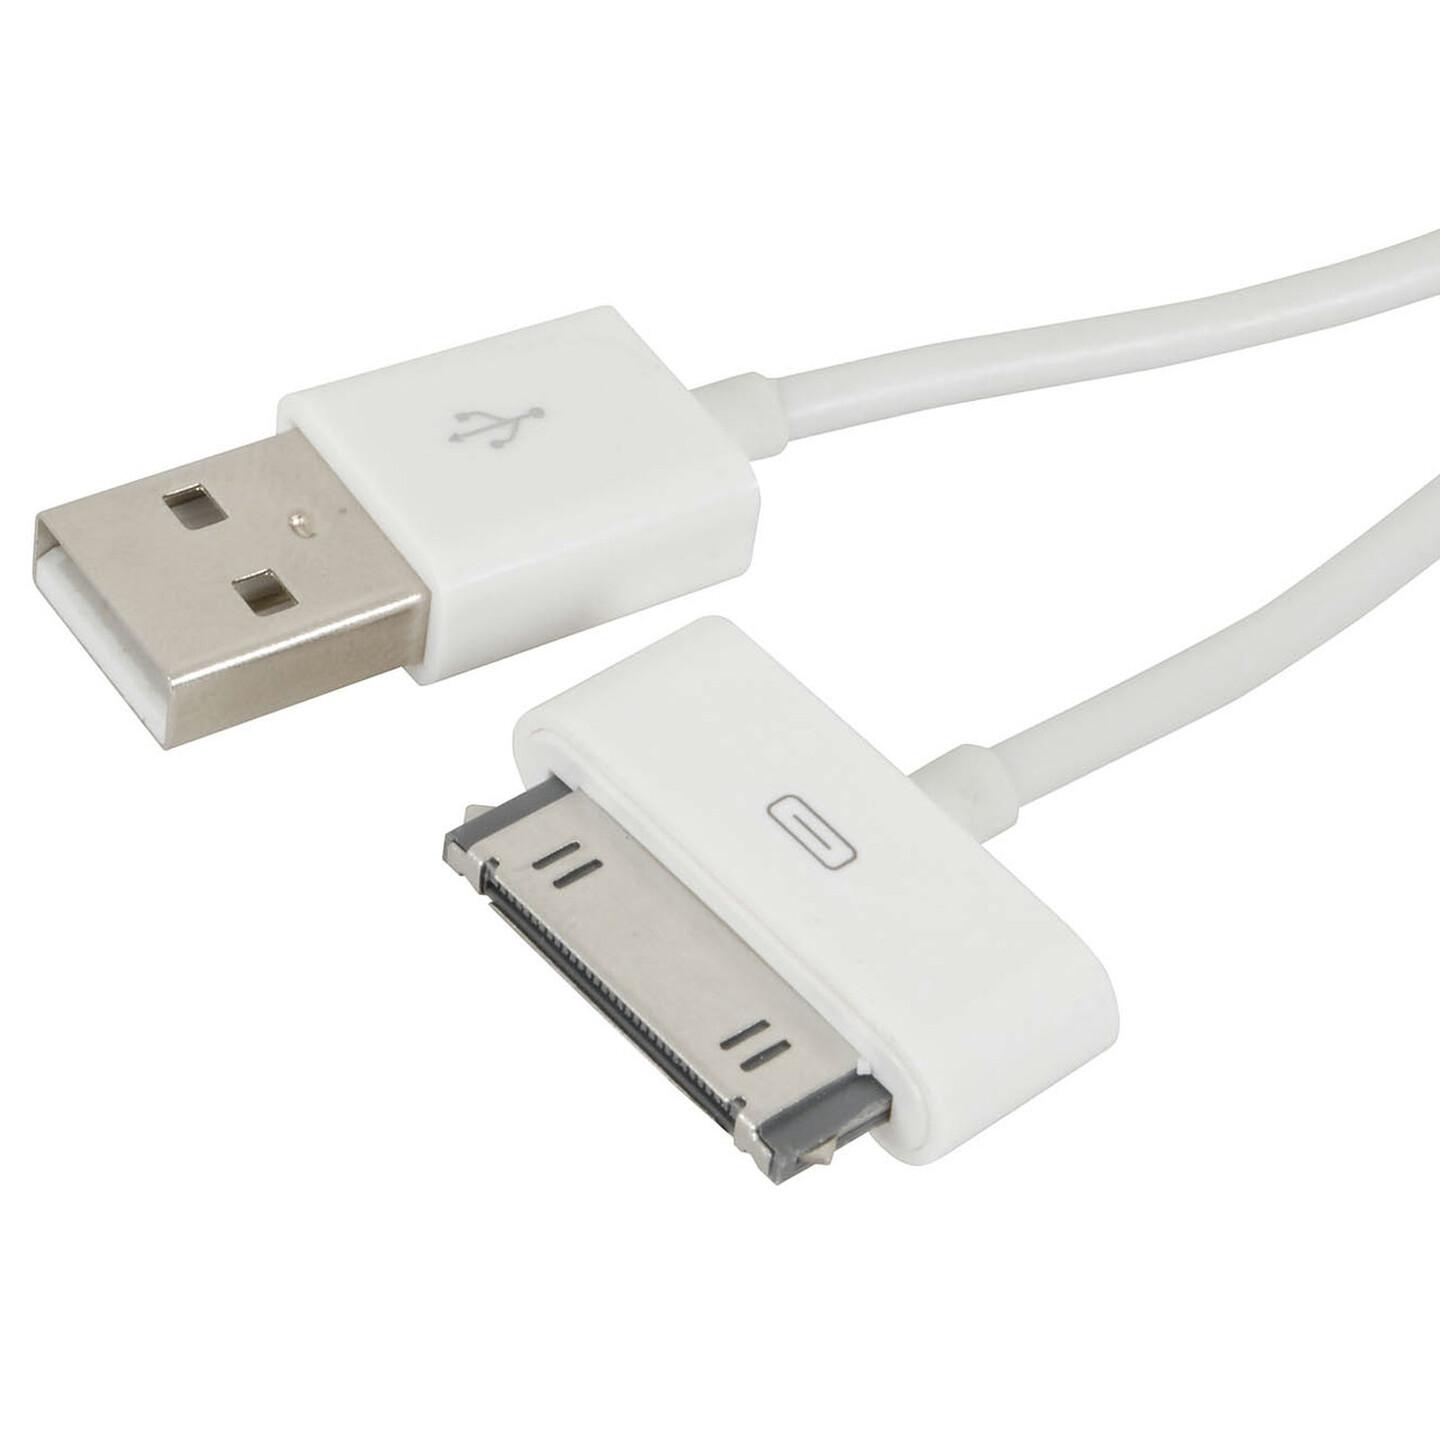 USB Charge/Sync Cable for iPad/iPhone/iPod